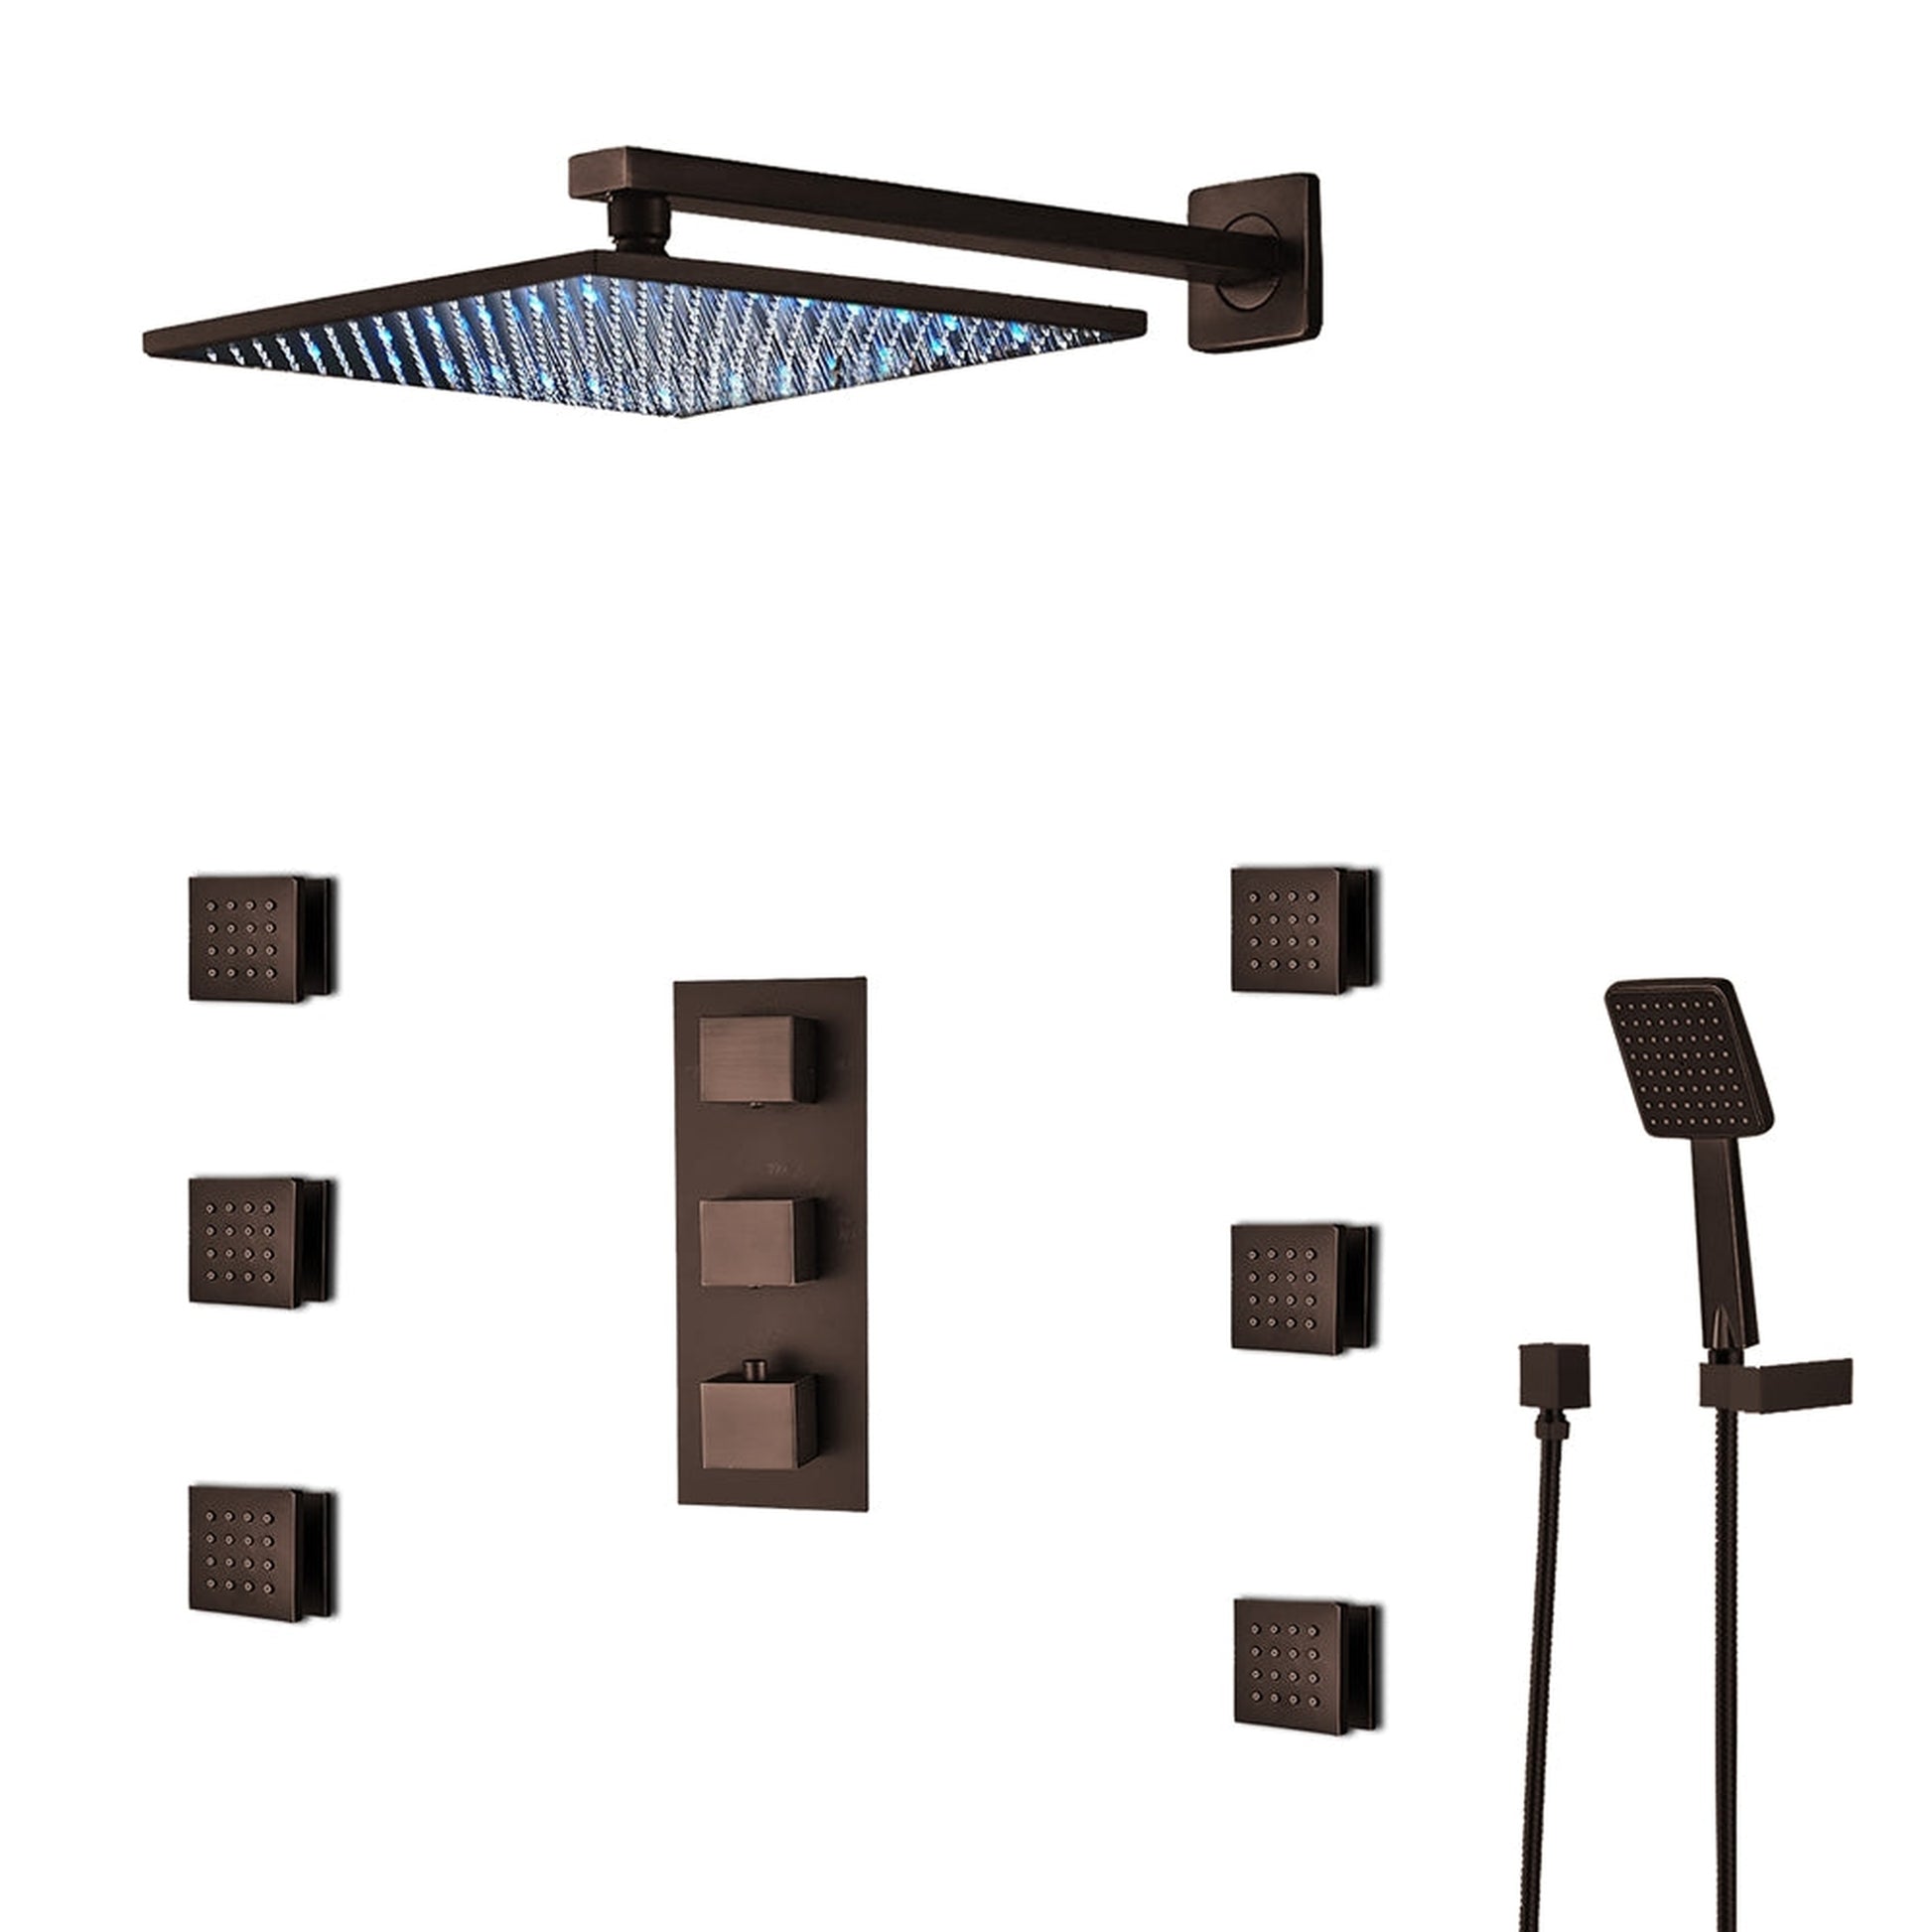 Fontana Sierra 20" Light Oil Rubbed Bronze Round Ceiling Mounted LED Shower System With 6-Jet Body Sprays and Hand Shower